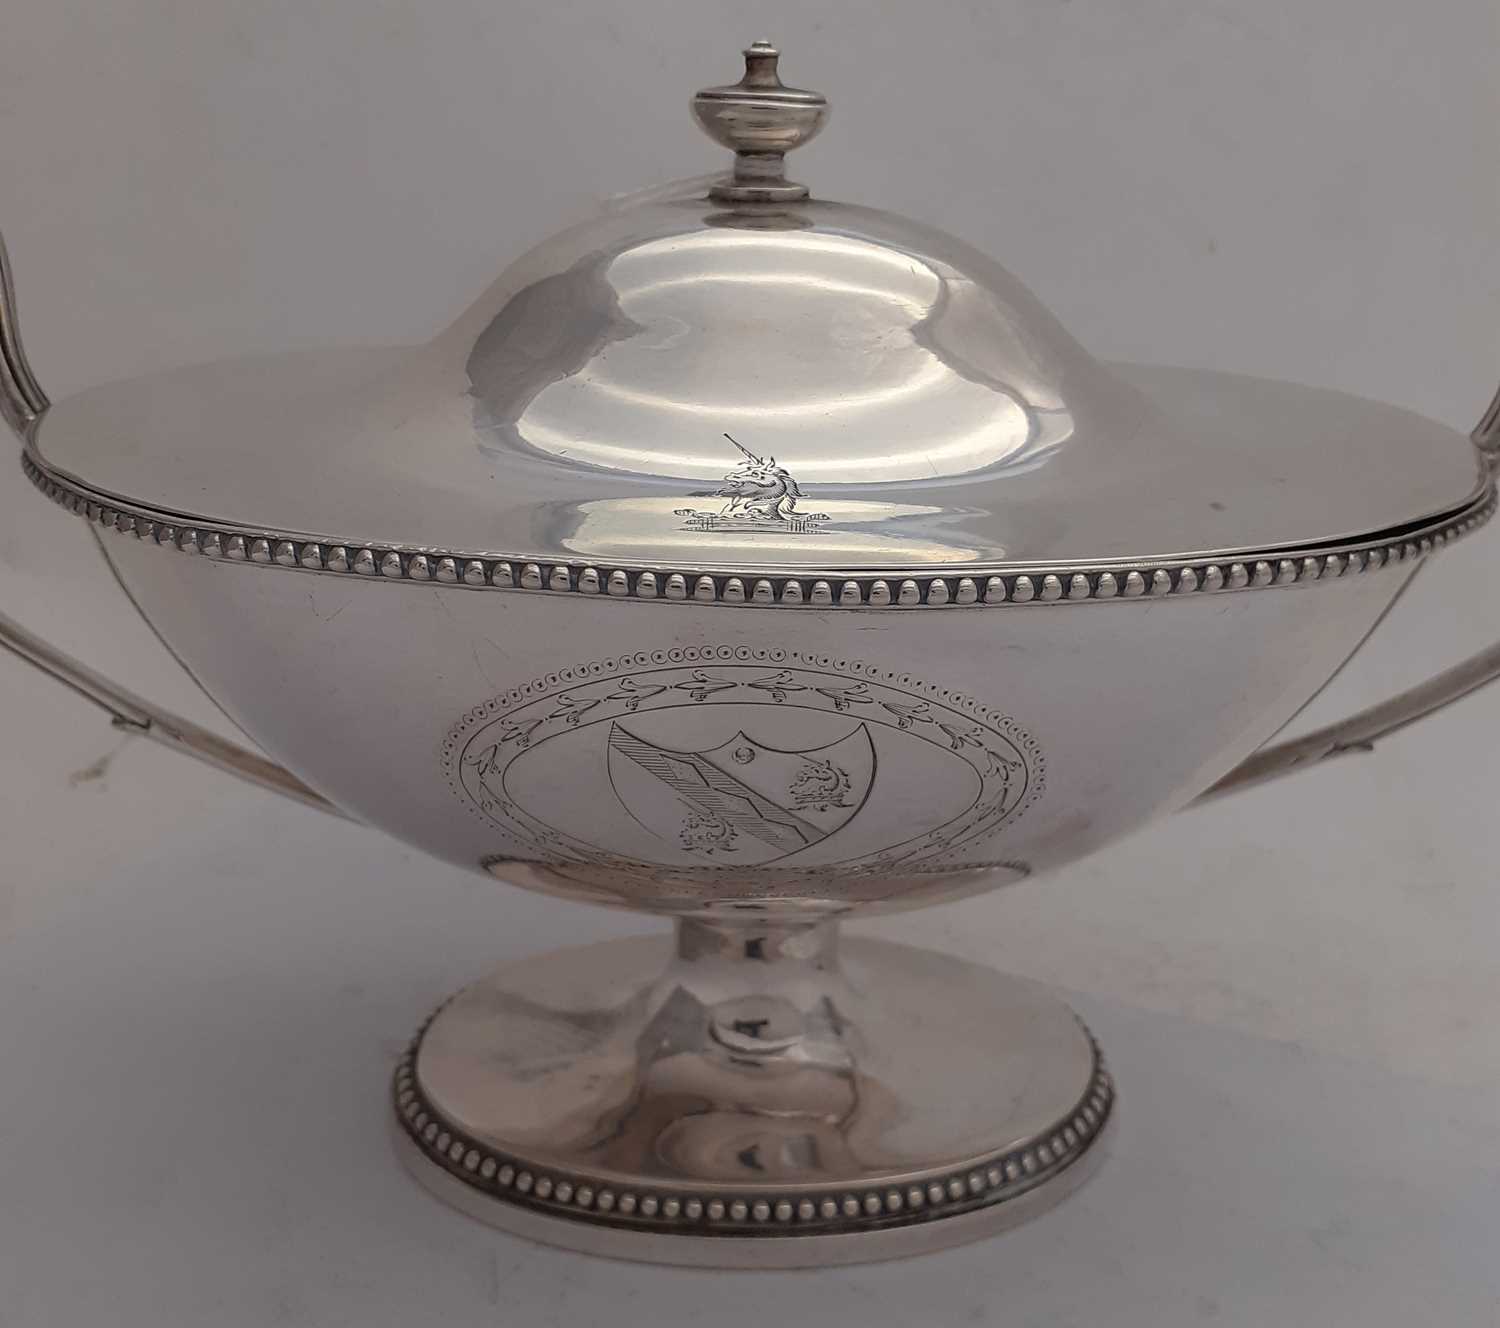 A Pair of George III Silver Sauce-Tureens and Covers, by Robert Hennell, London, 1782 - Image 4 of 17